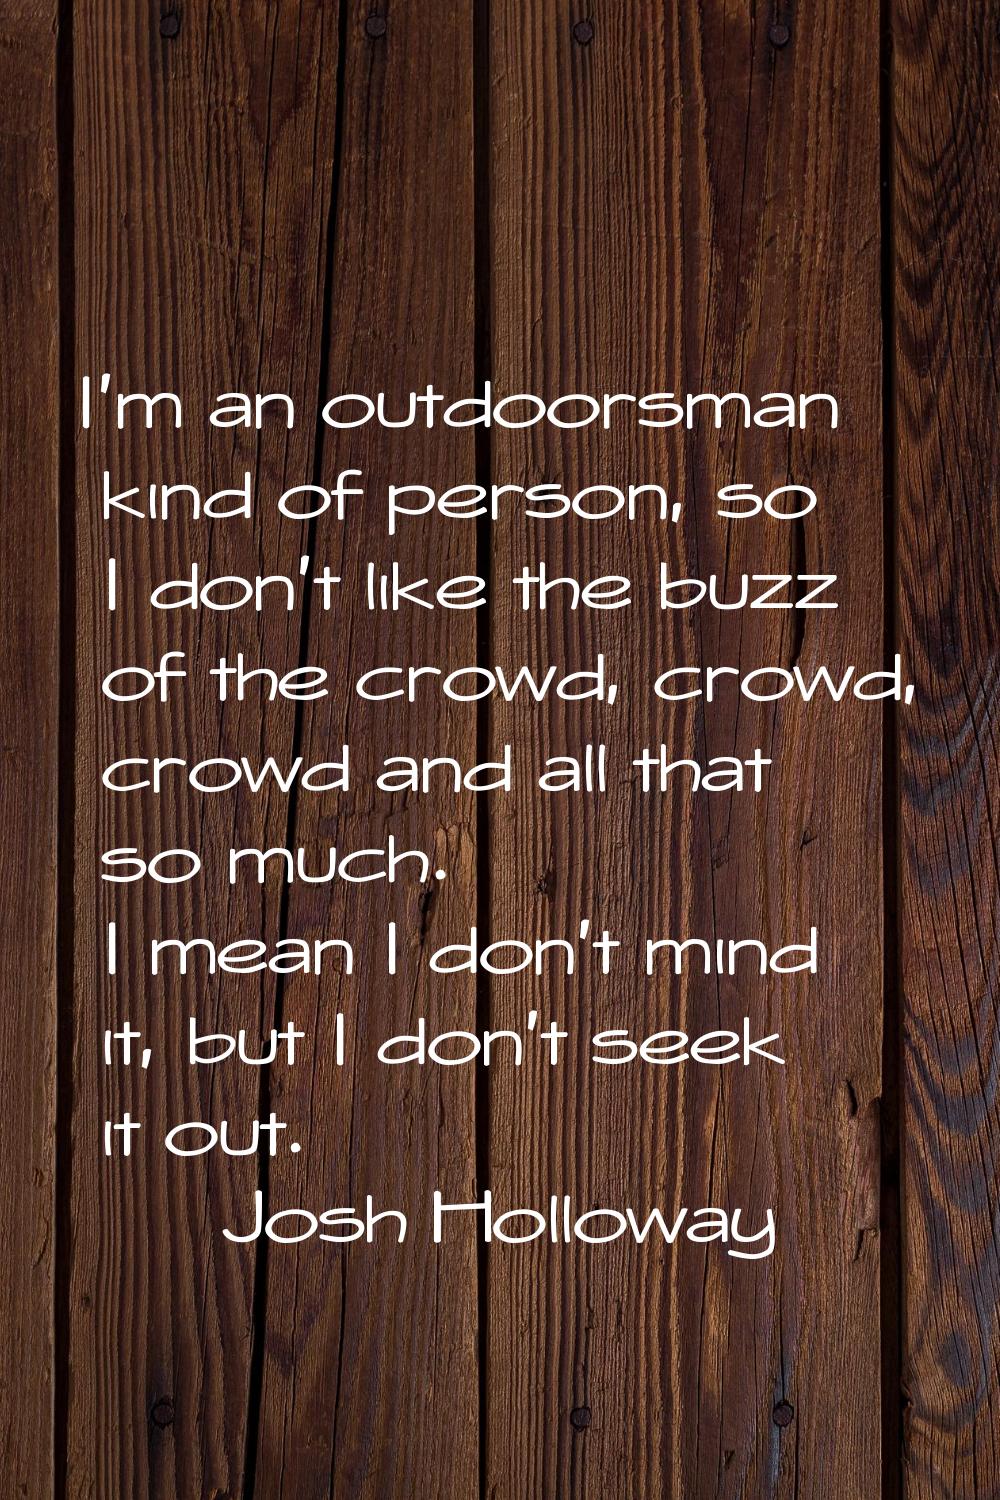 I'm an outdoorsman kind of person, so I don't like the buzz of the crowd, crowd, crowd and all that